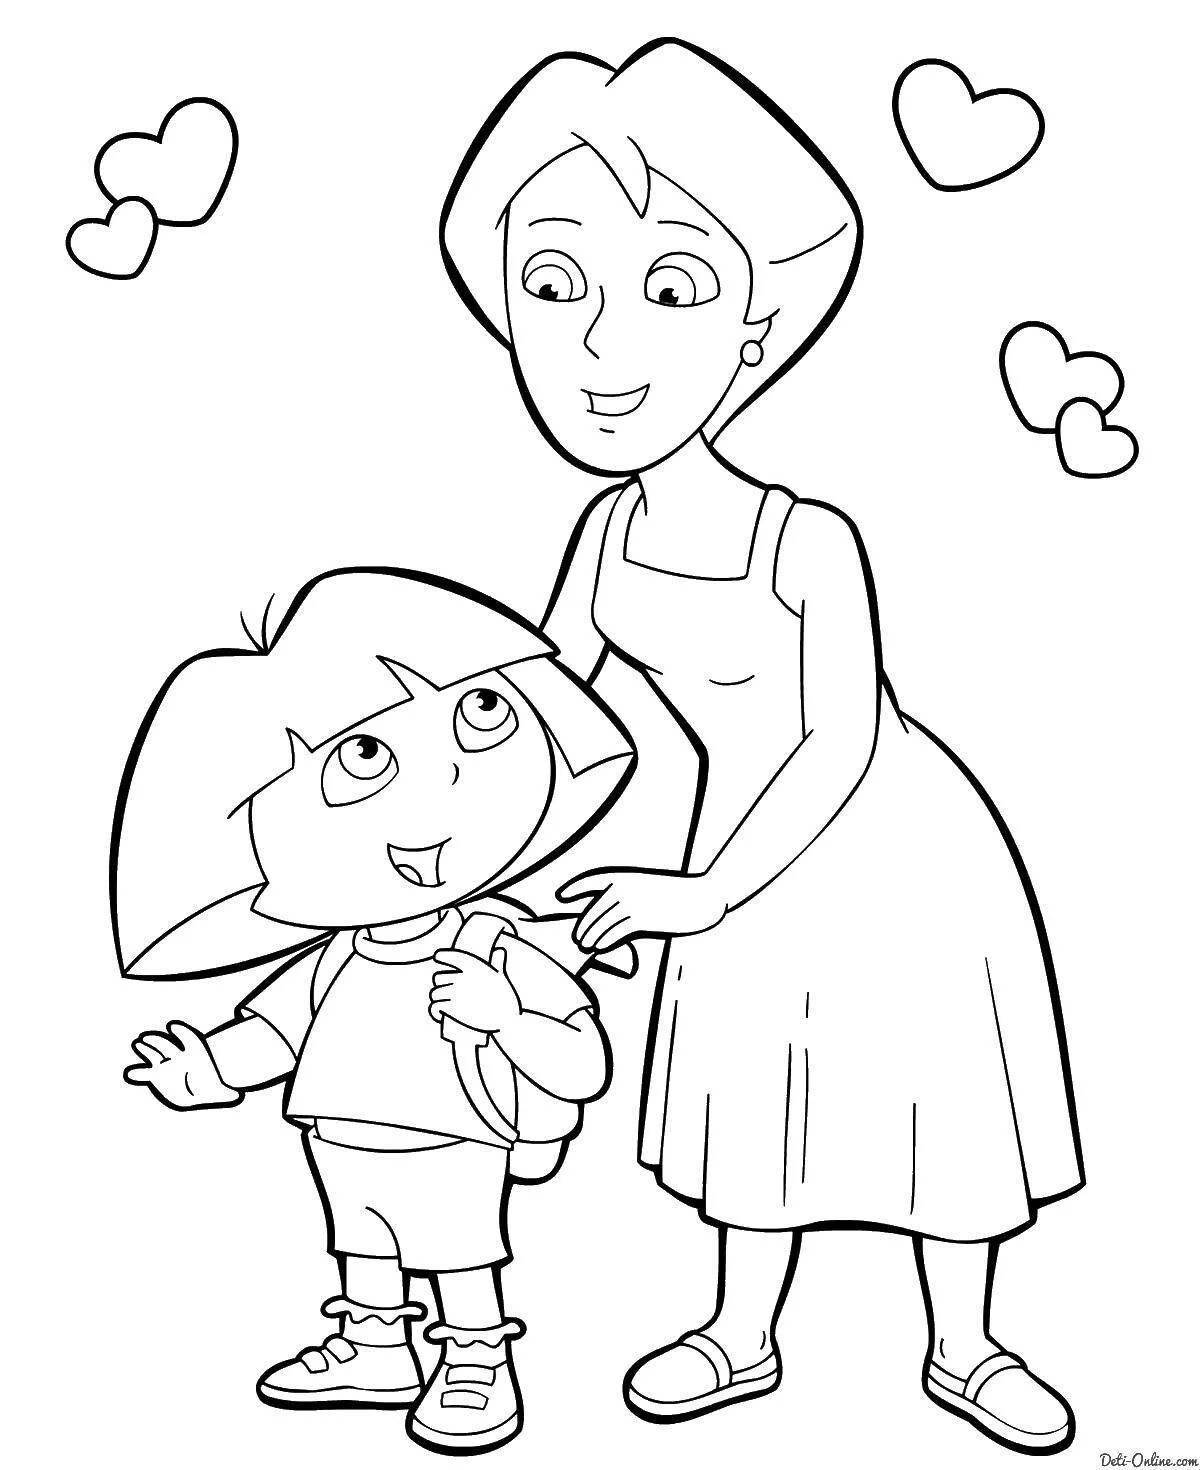 Animated mother and daughter coloring page